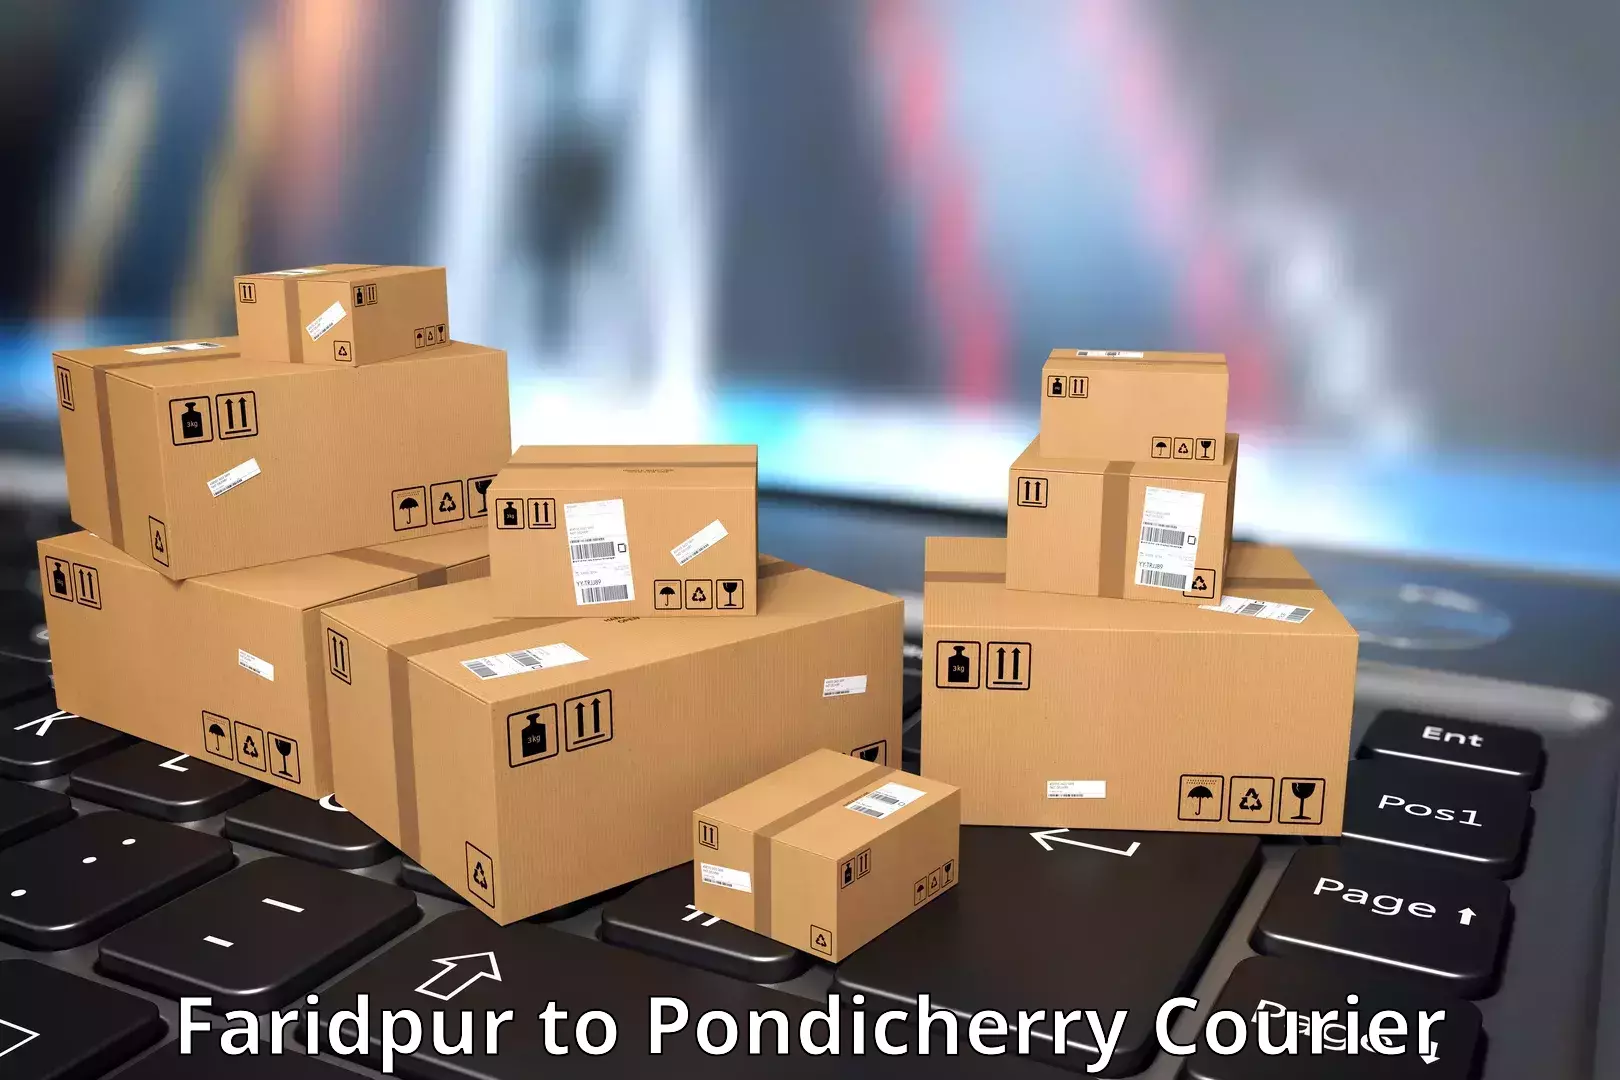 Courier service partnerships Faridpur to Pondicherry